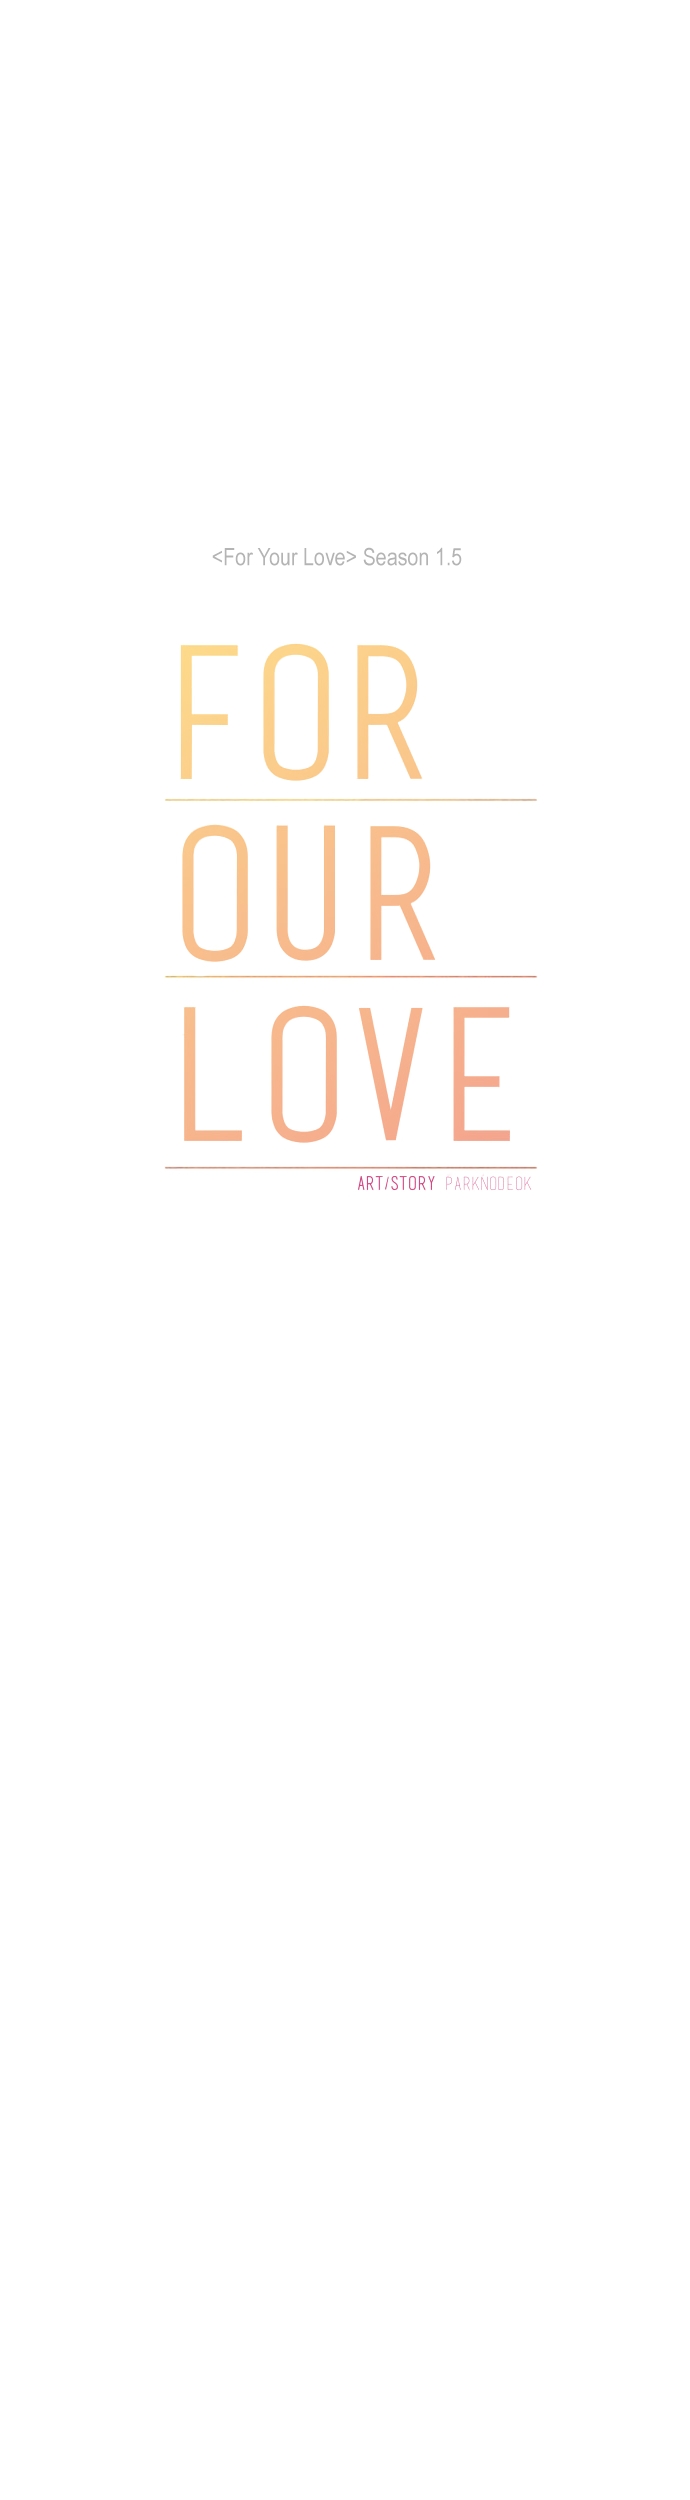 For Your Love Vol. 1.5 Ch. 59 For Our Love Chapter 4